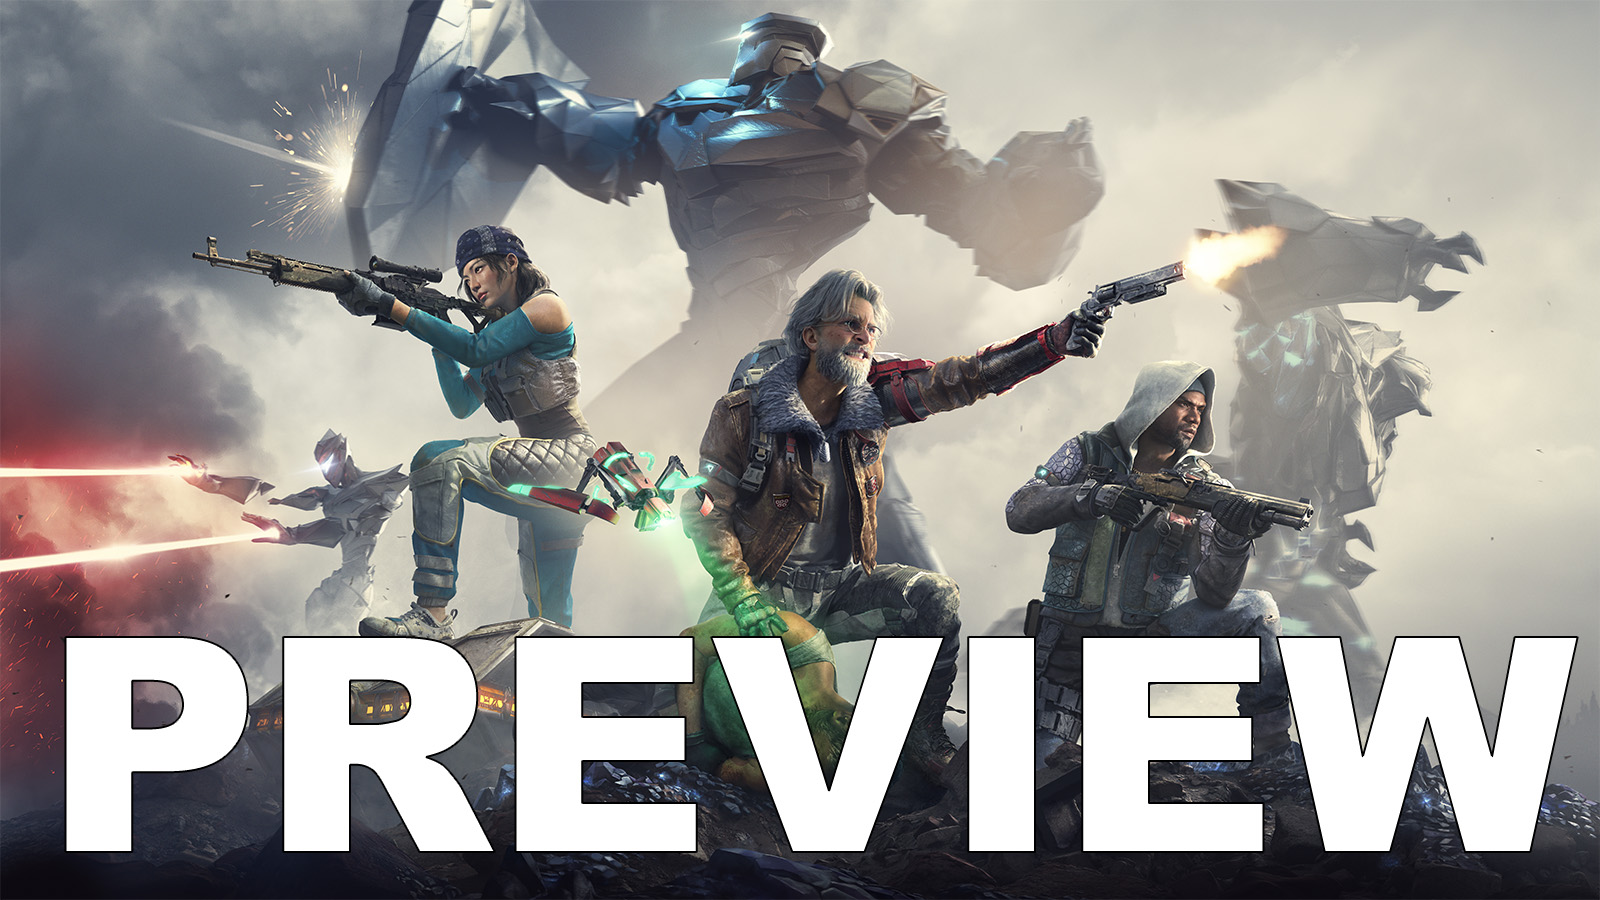 Synced Preview: An Exceptional Sci-Fi Co-op Shooter